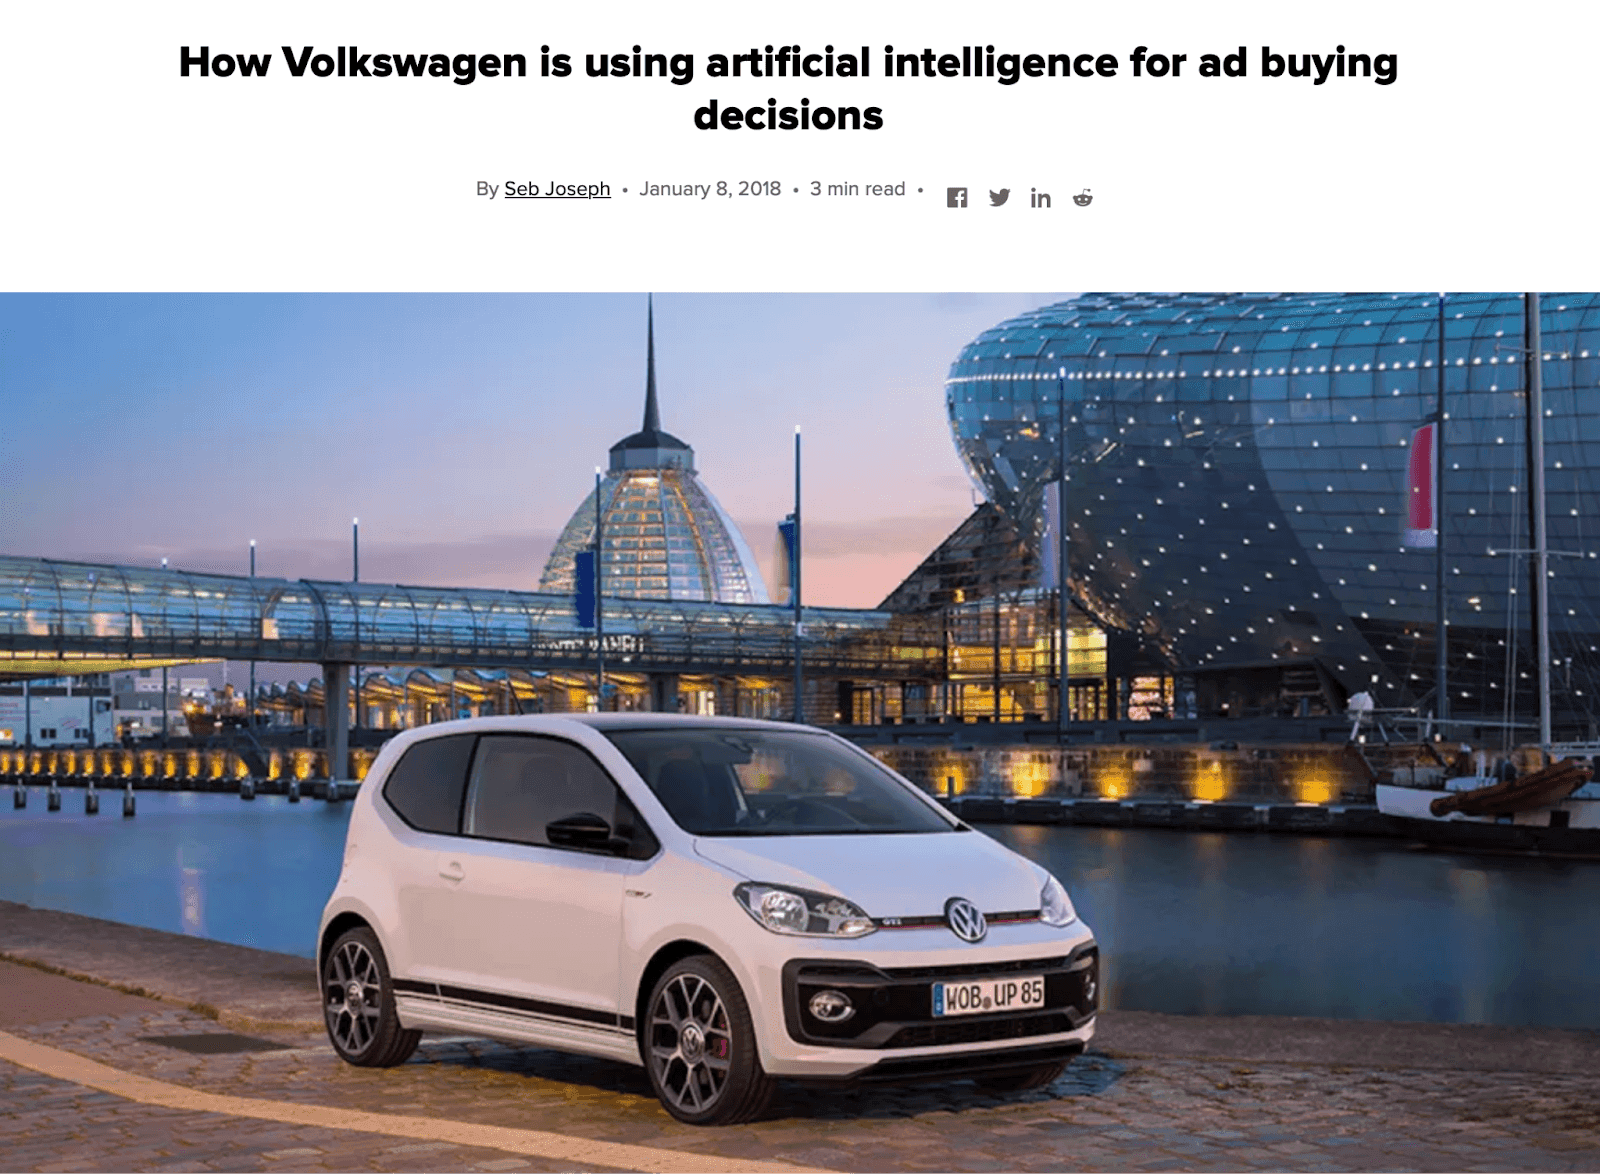 How Volkswagen is using AI for ad buying decisions